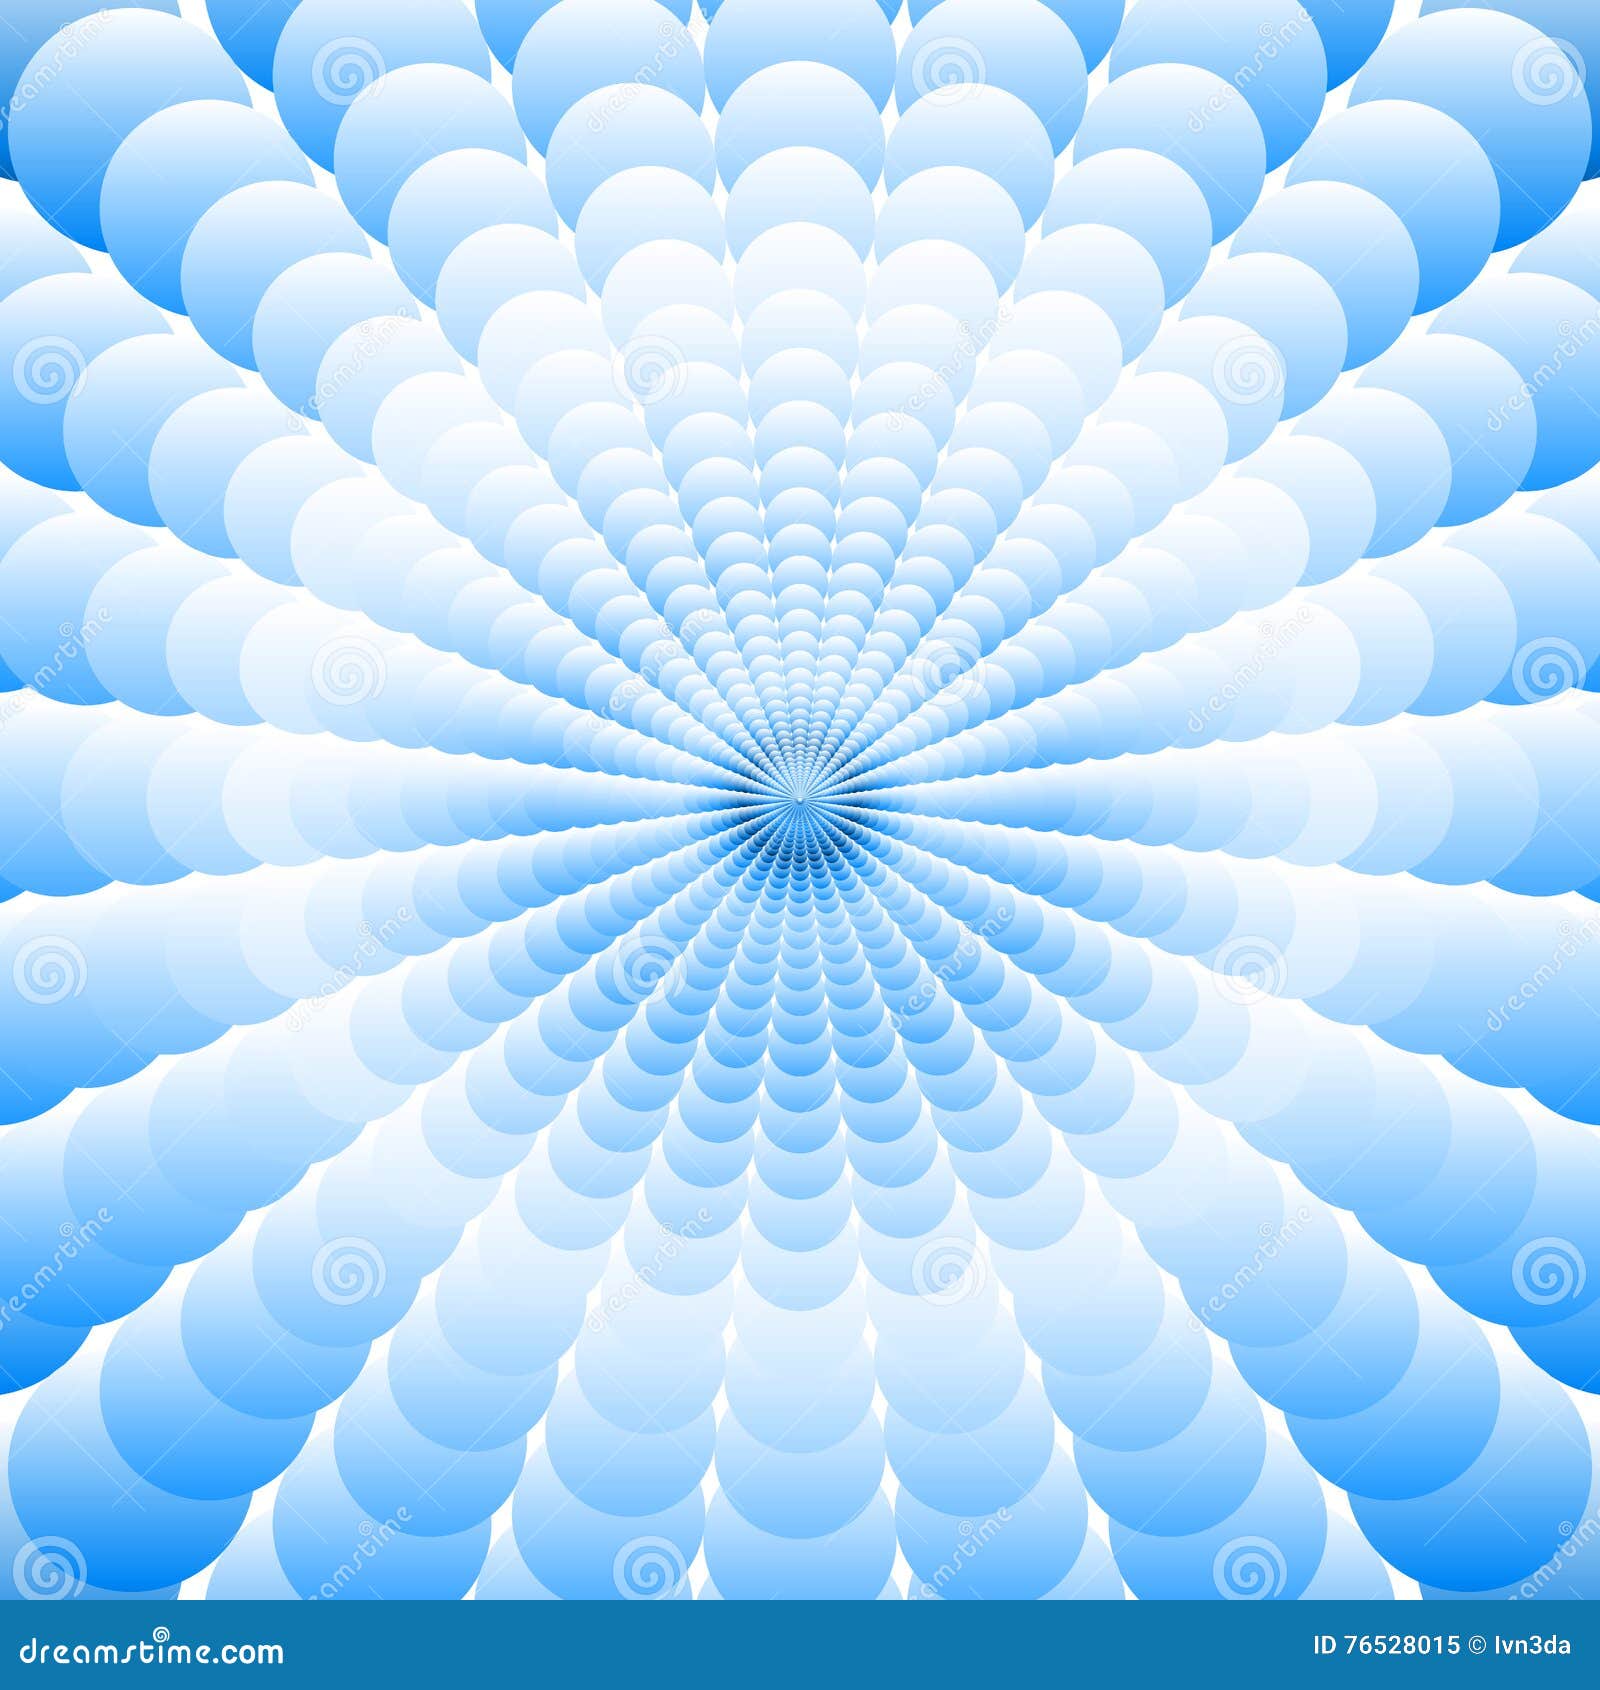 abstract blue background of many superposed blue circles